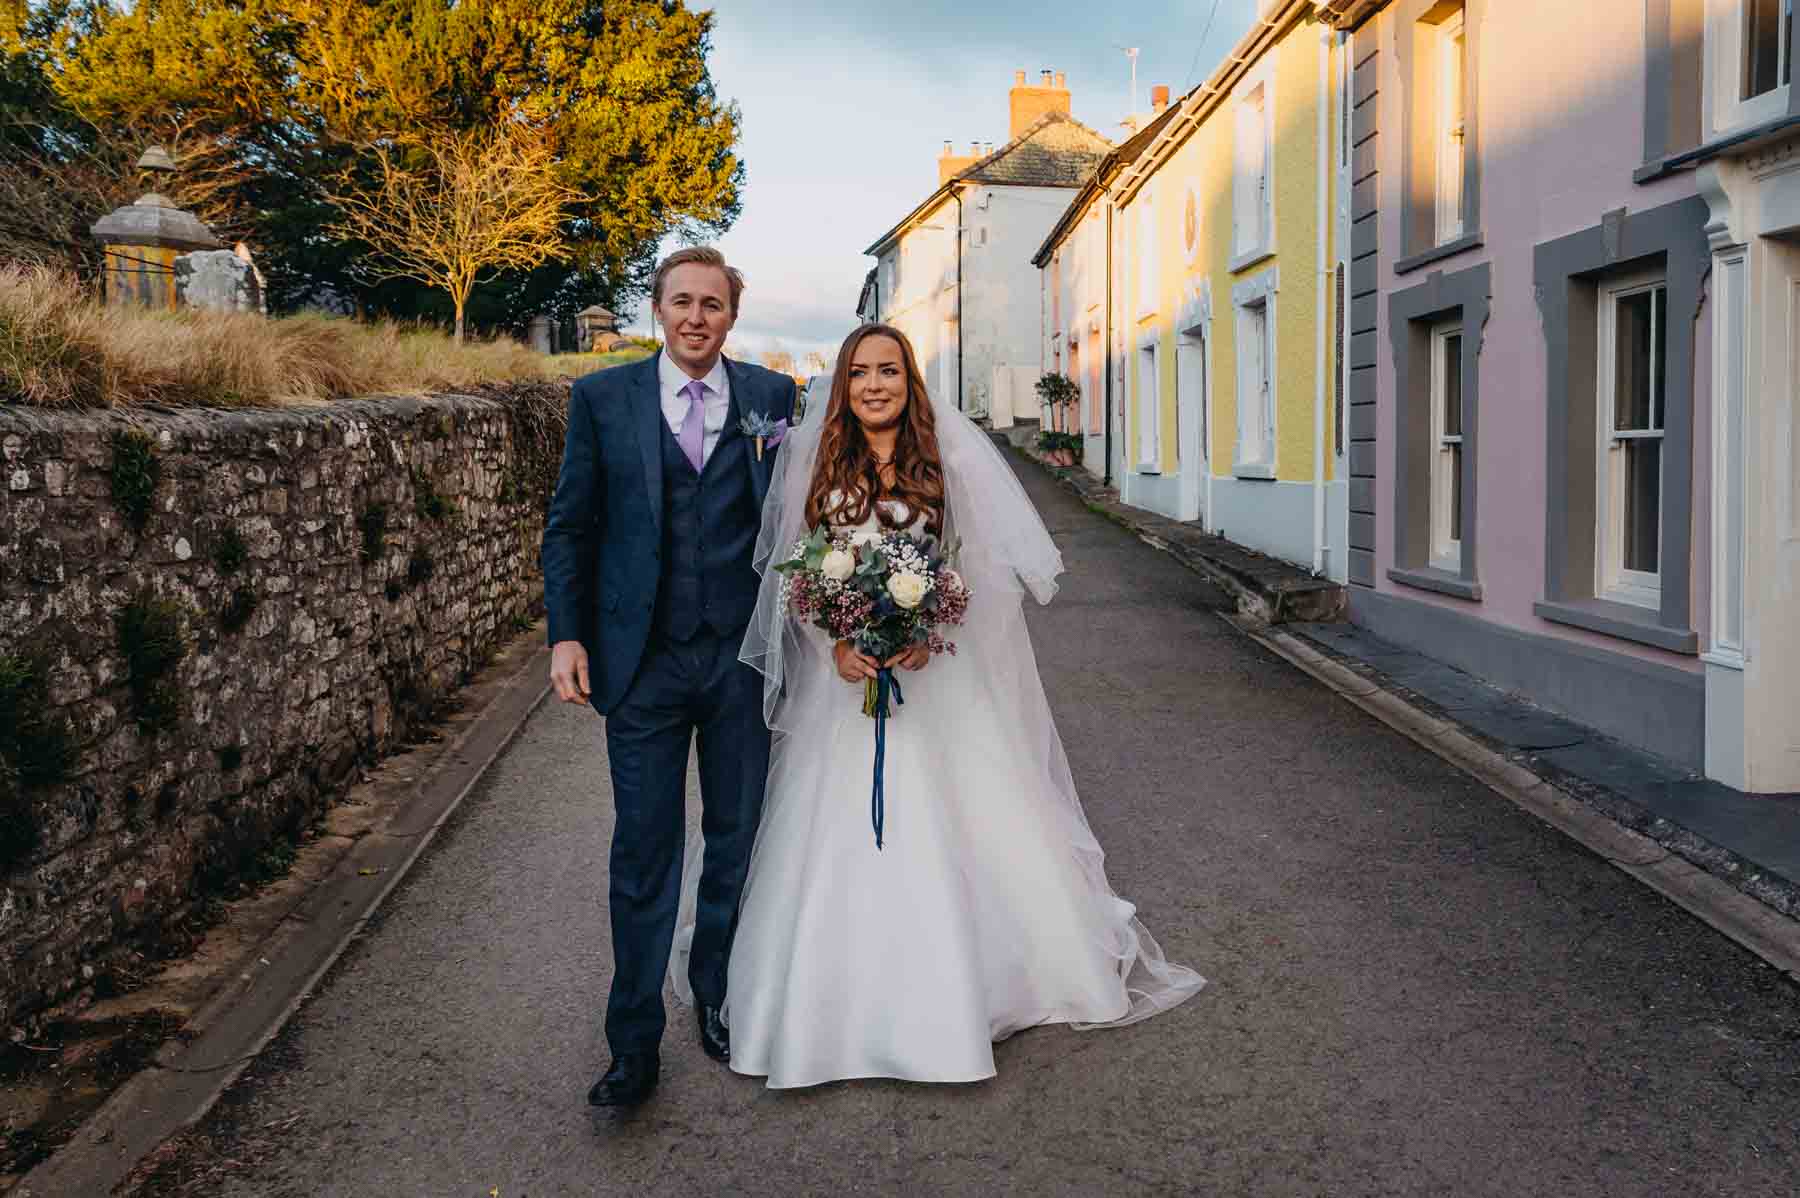 Bride and Groom walking on the street in Myddfai - natural wedding photography Wales